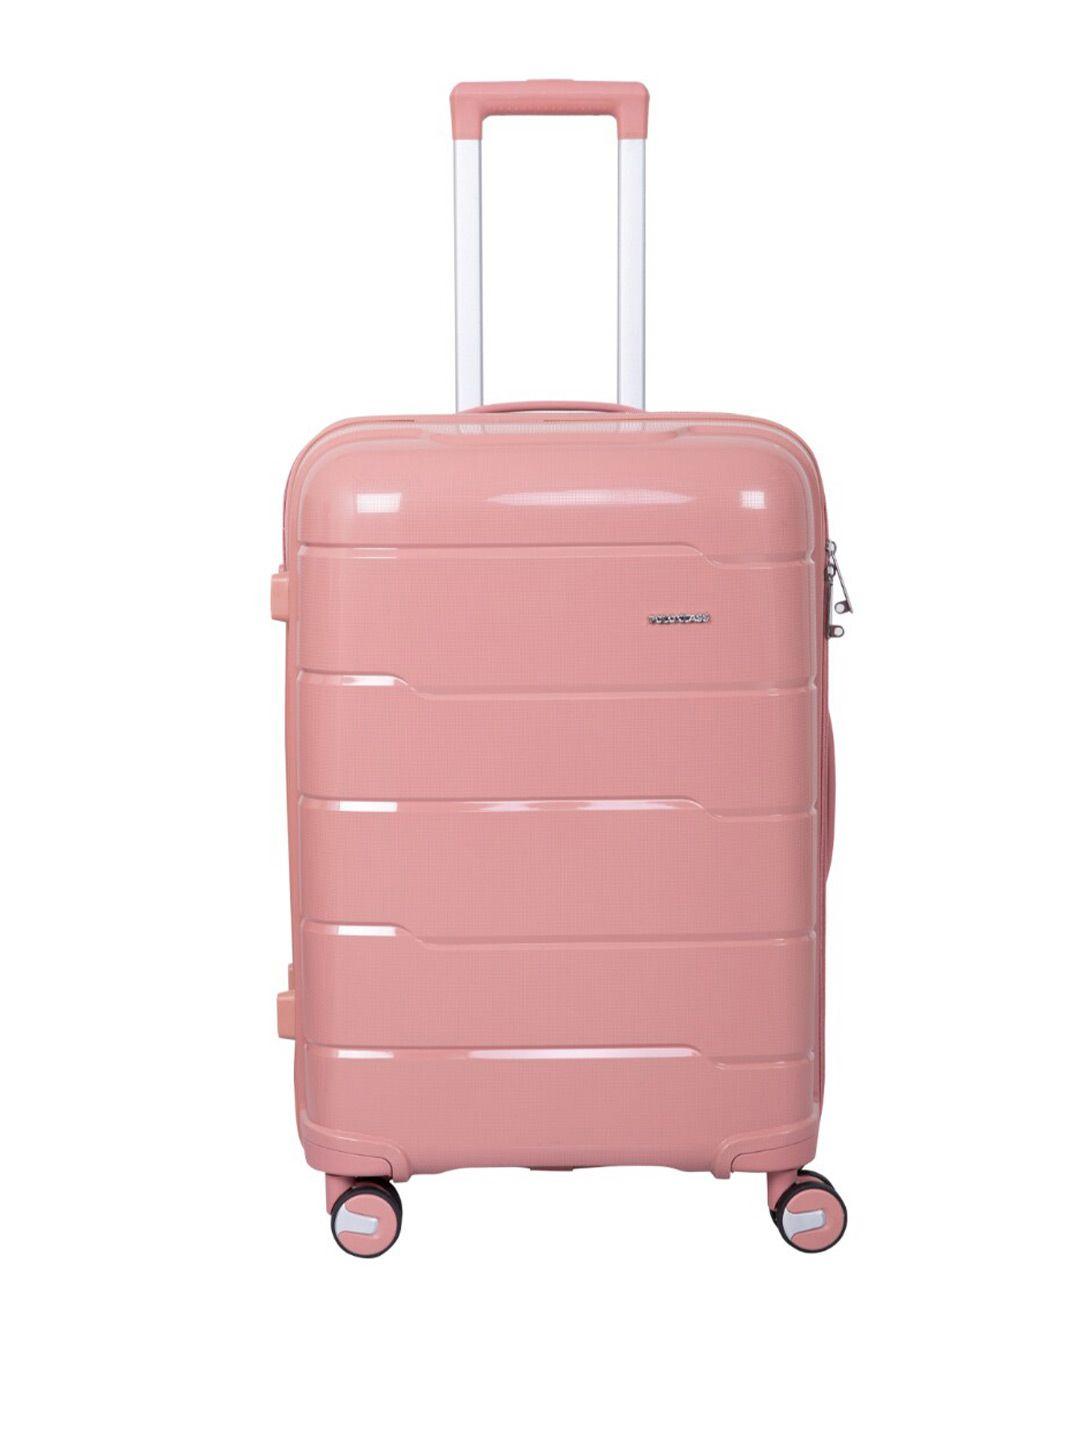 polo class hard-sided large trolley suitcase